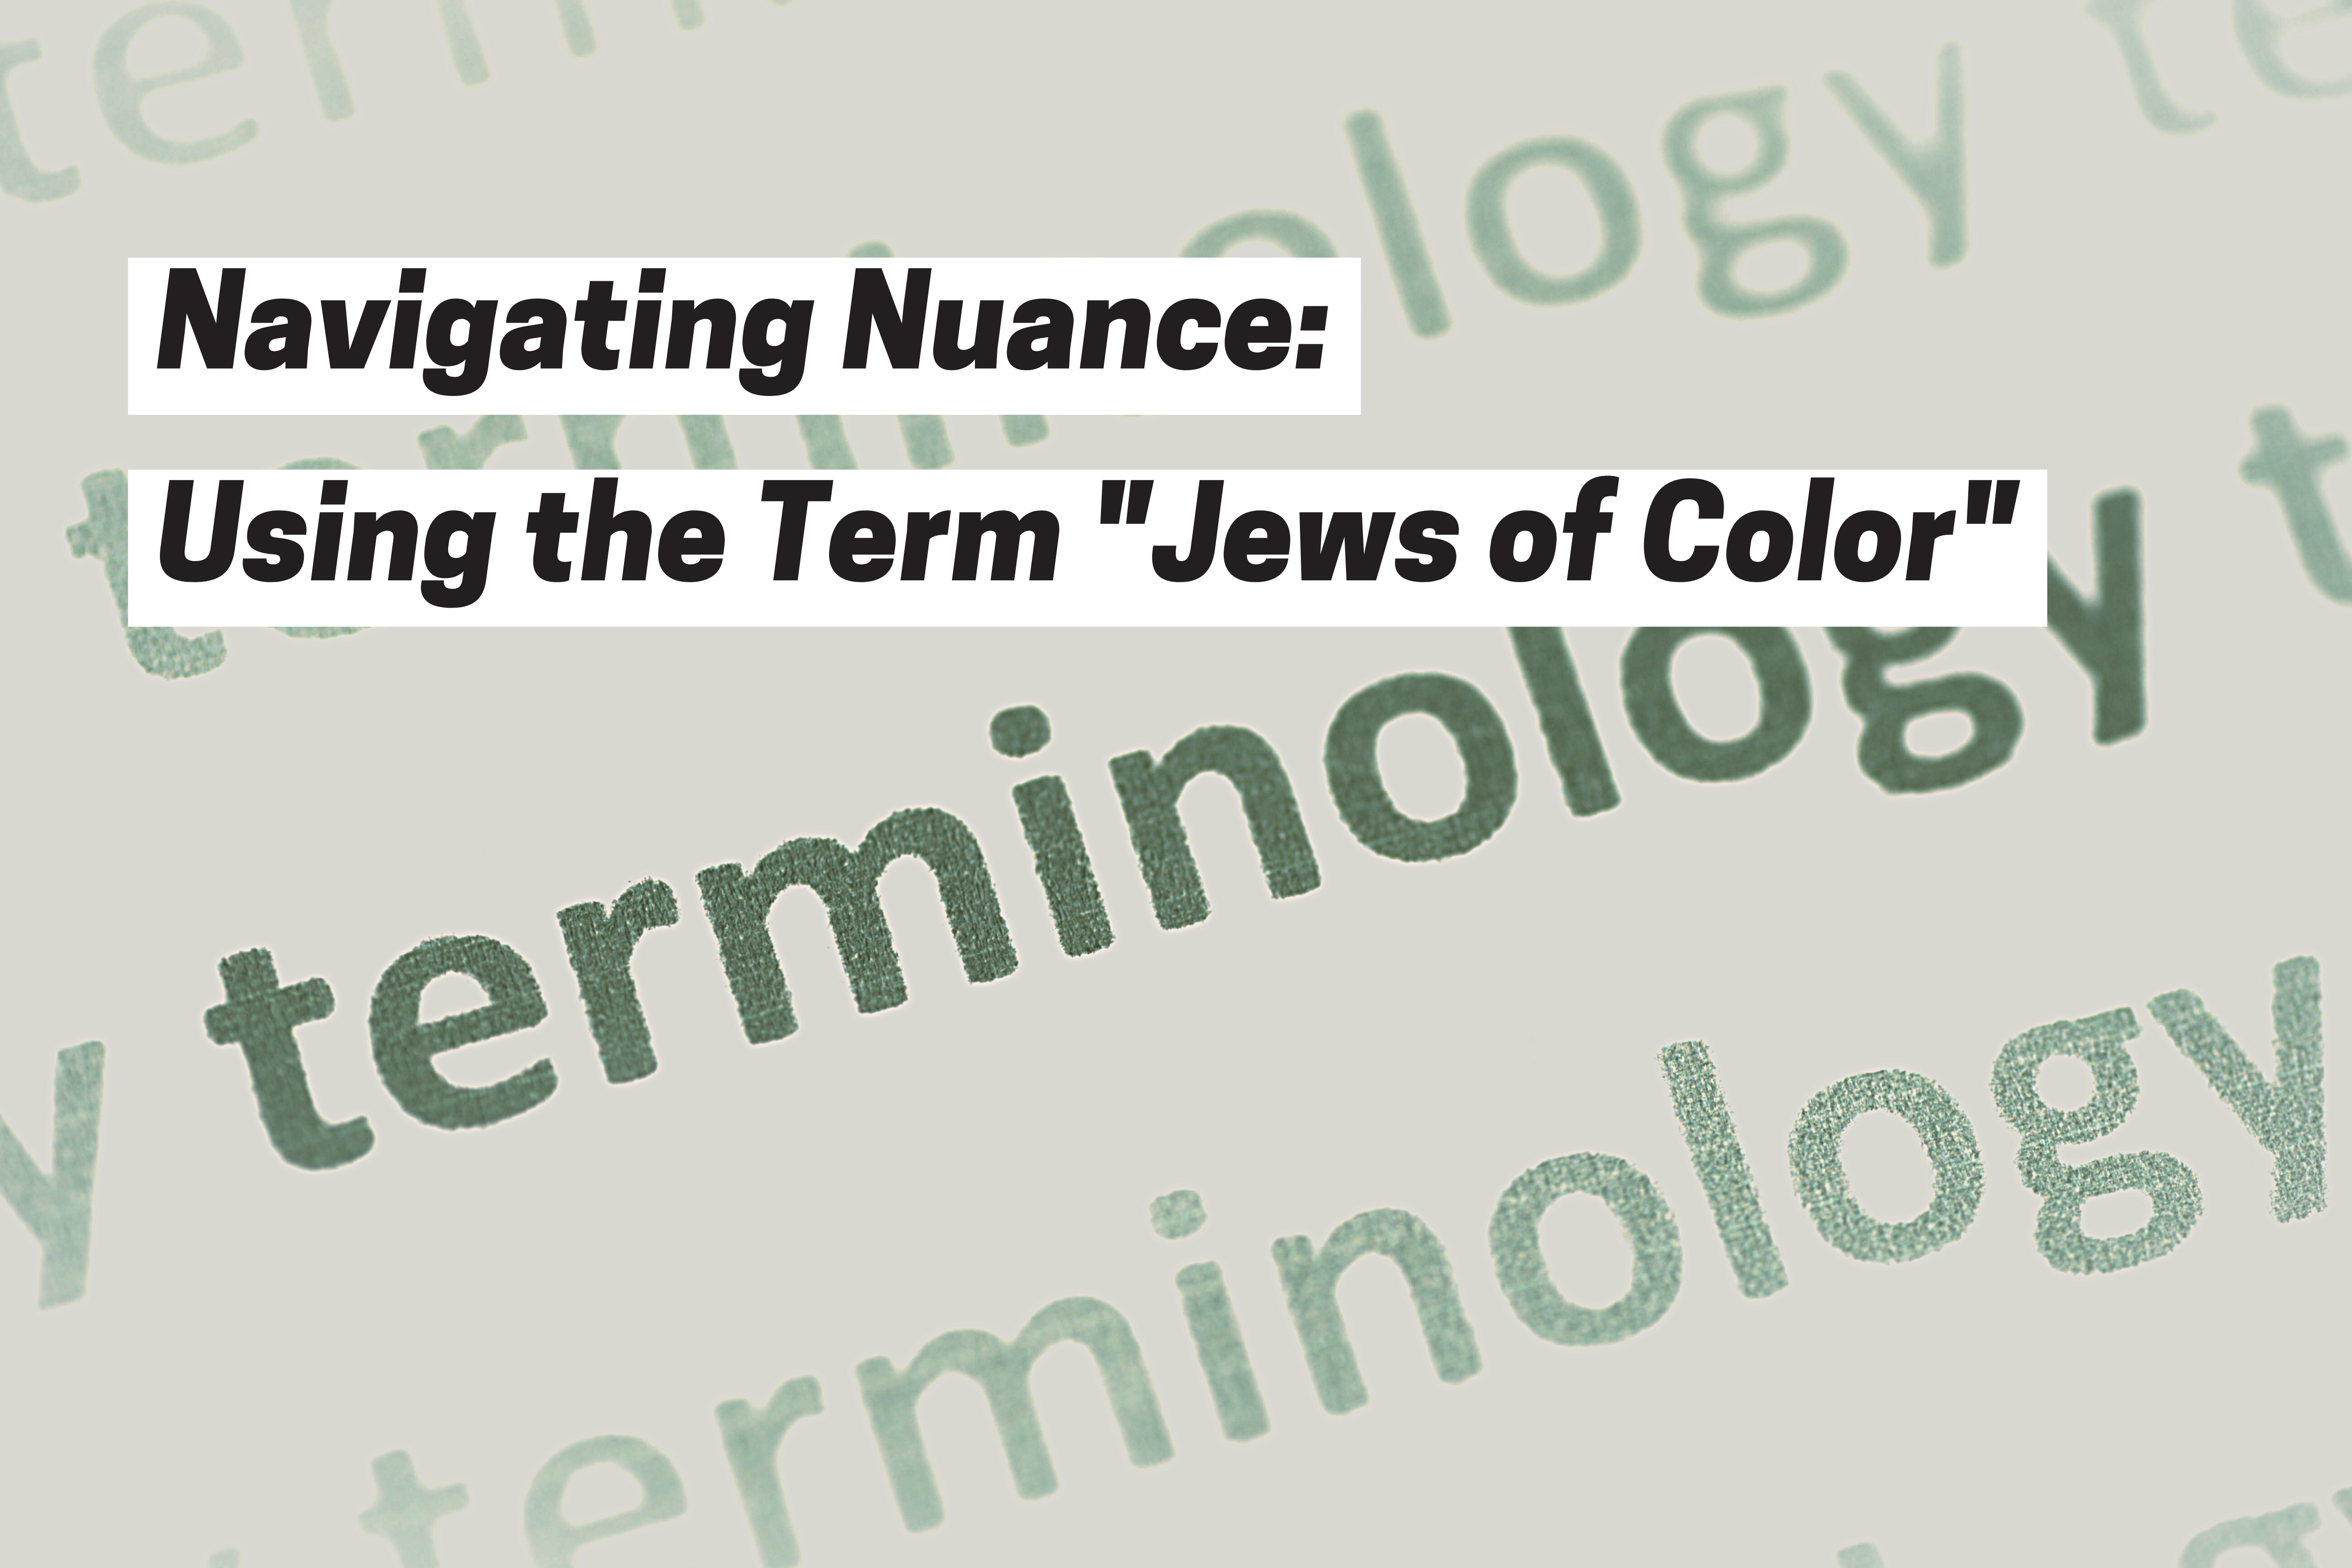 Navigating Nuance: Using the Term "Jews of Color" title with a printed page-effect background that says terminology